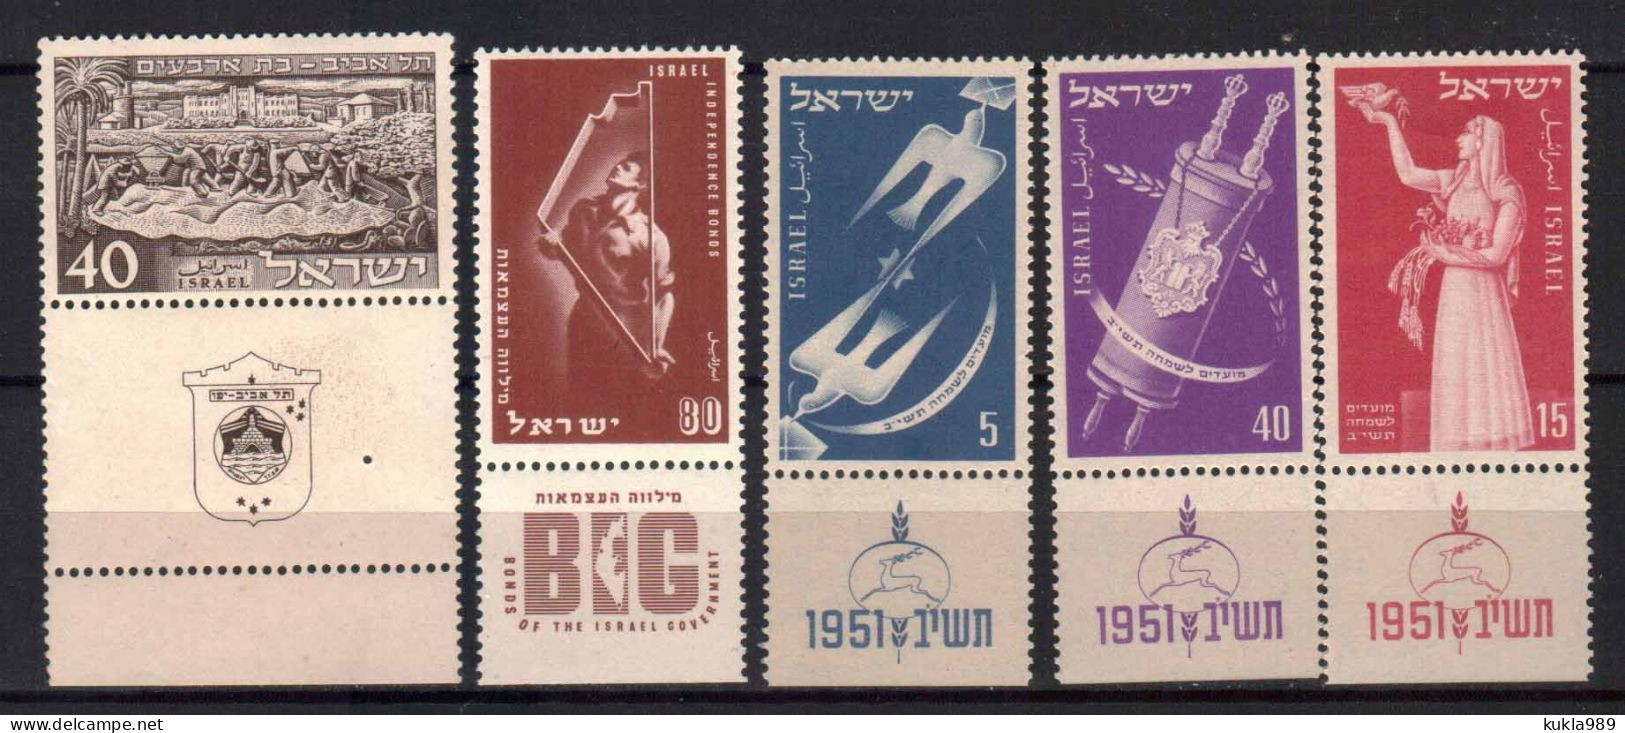 ISRAEL STAMPS. 1951, MNH - Nuovi (con Tab)